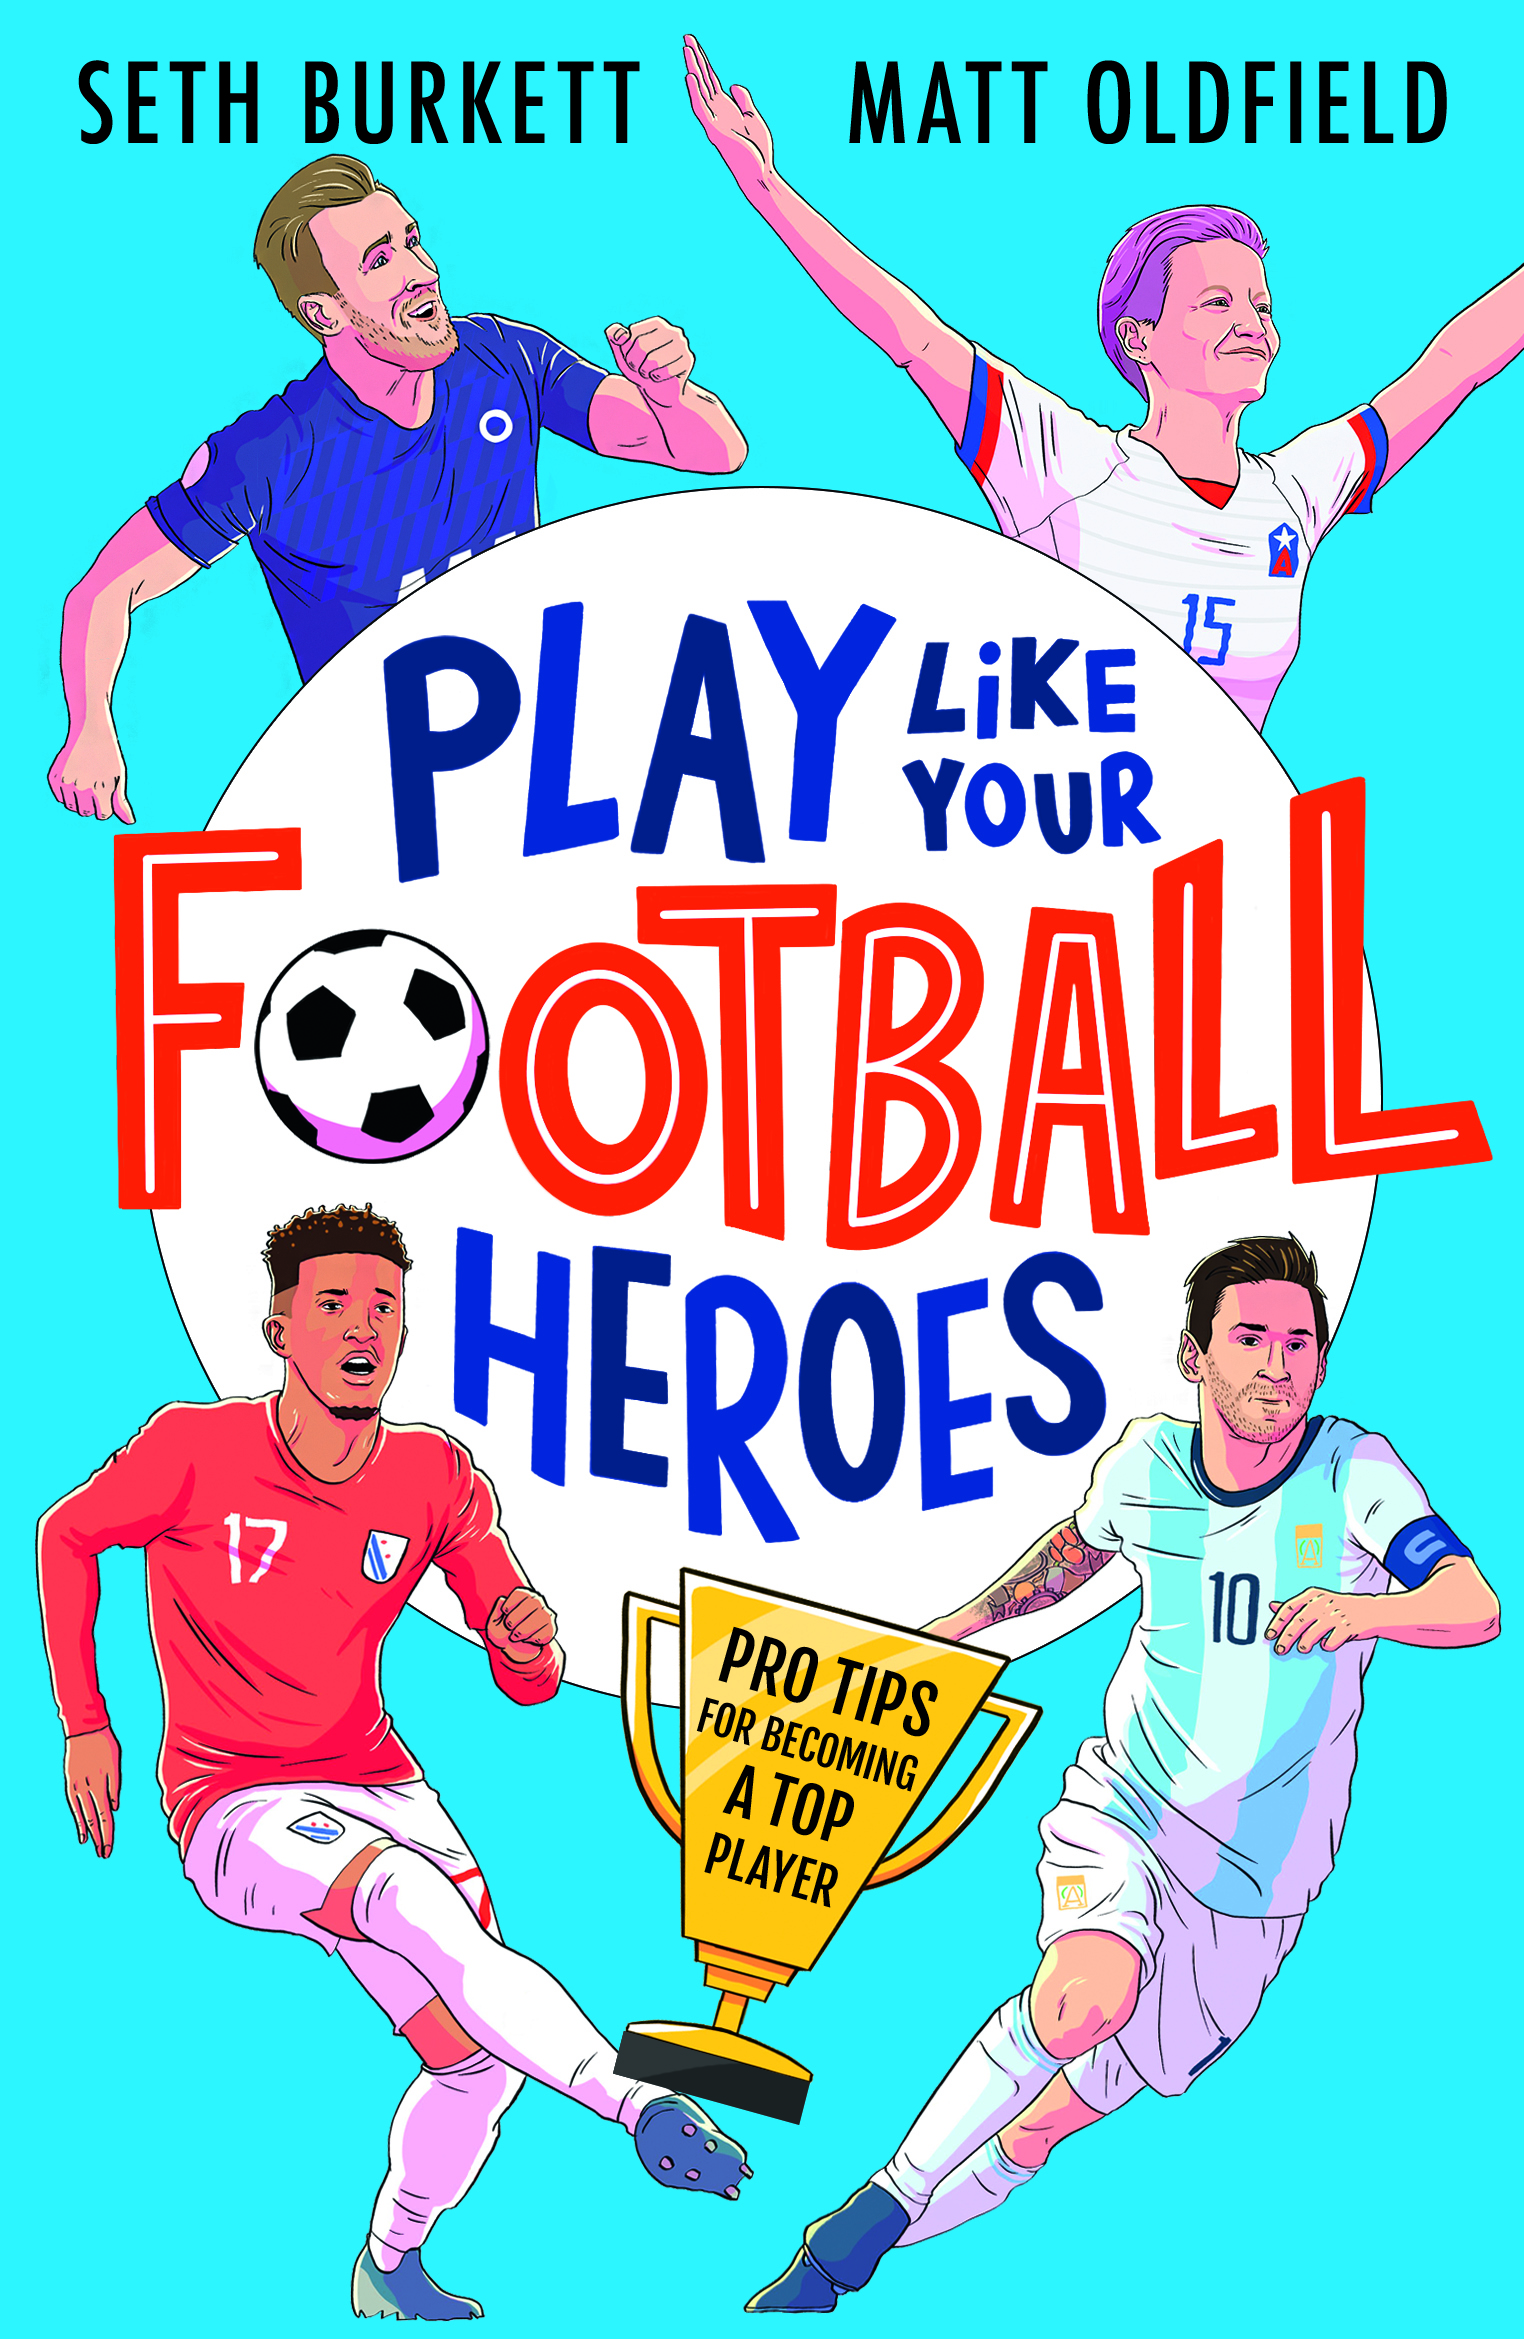 Play-Like-Your-Football-Heroes-Pro-tips-for-becoming-a-top-player